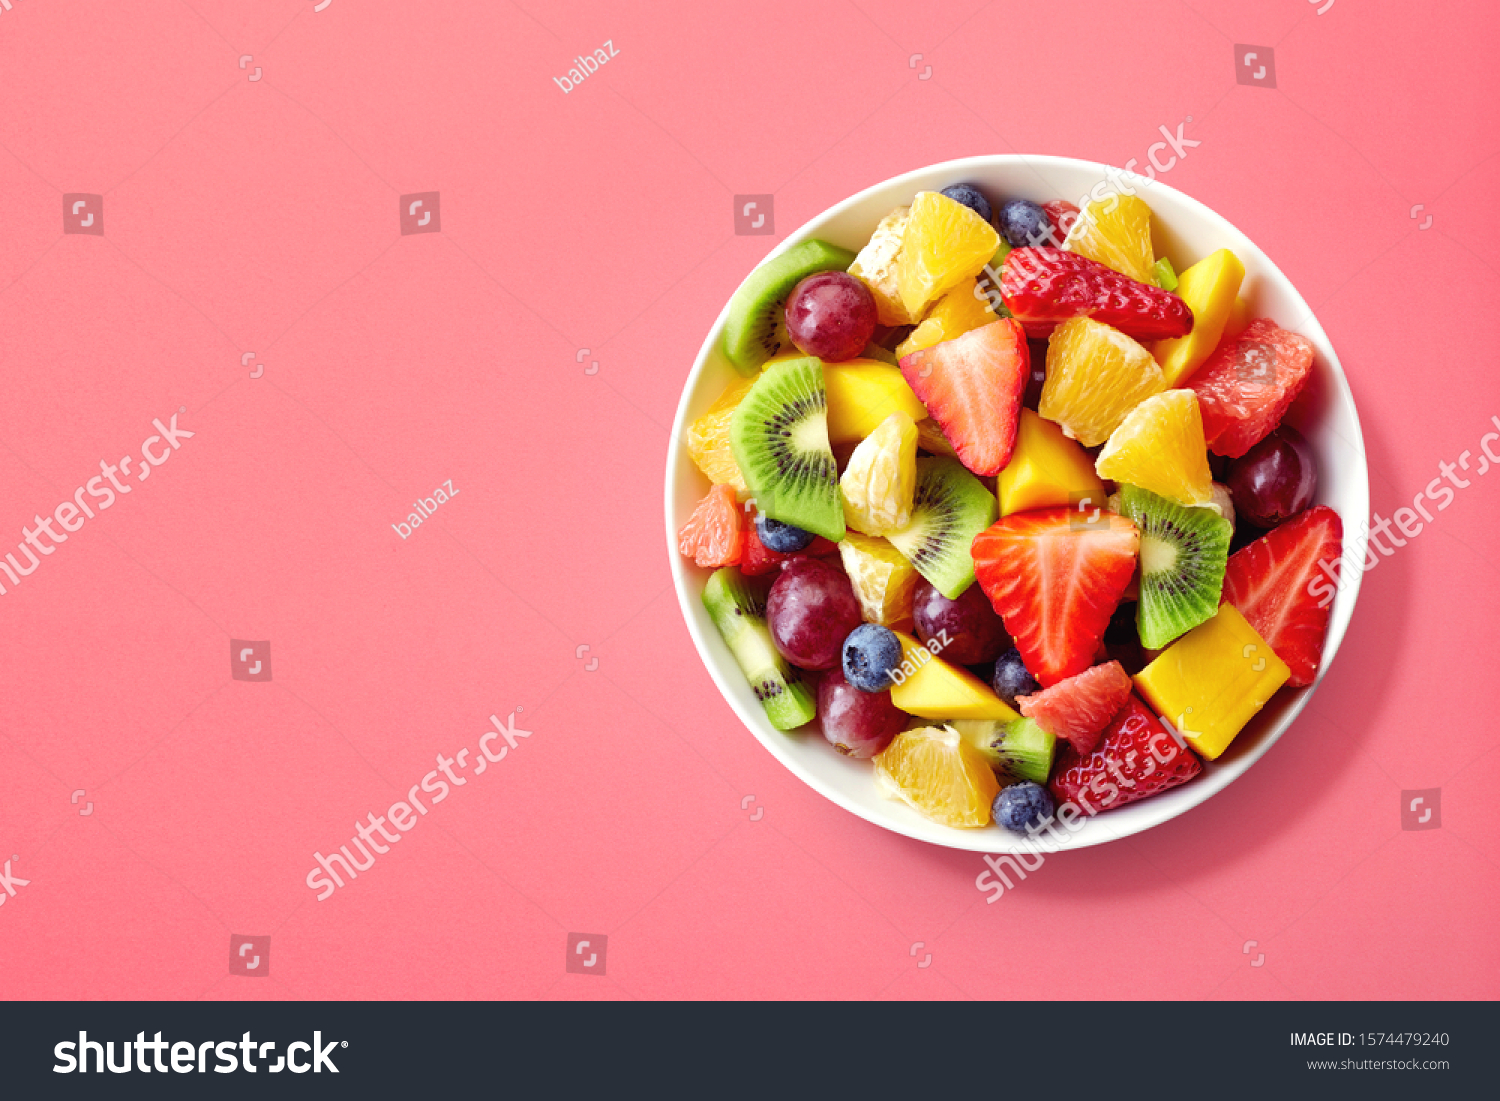 Bowl of healthy fresh fruit salad on pink background, top view #1574479240